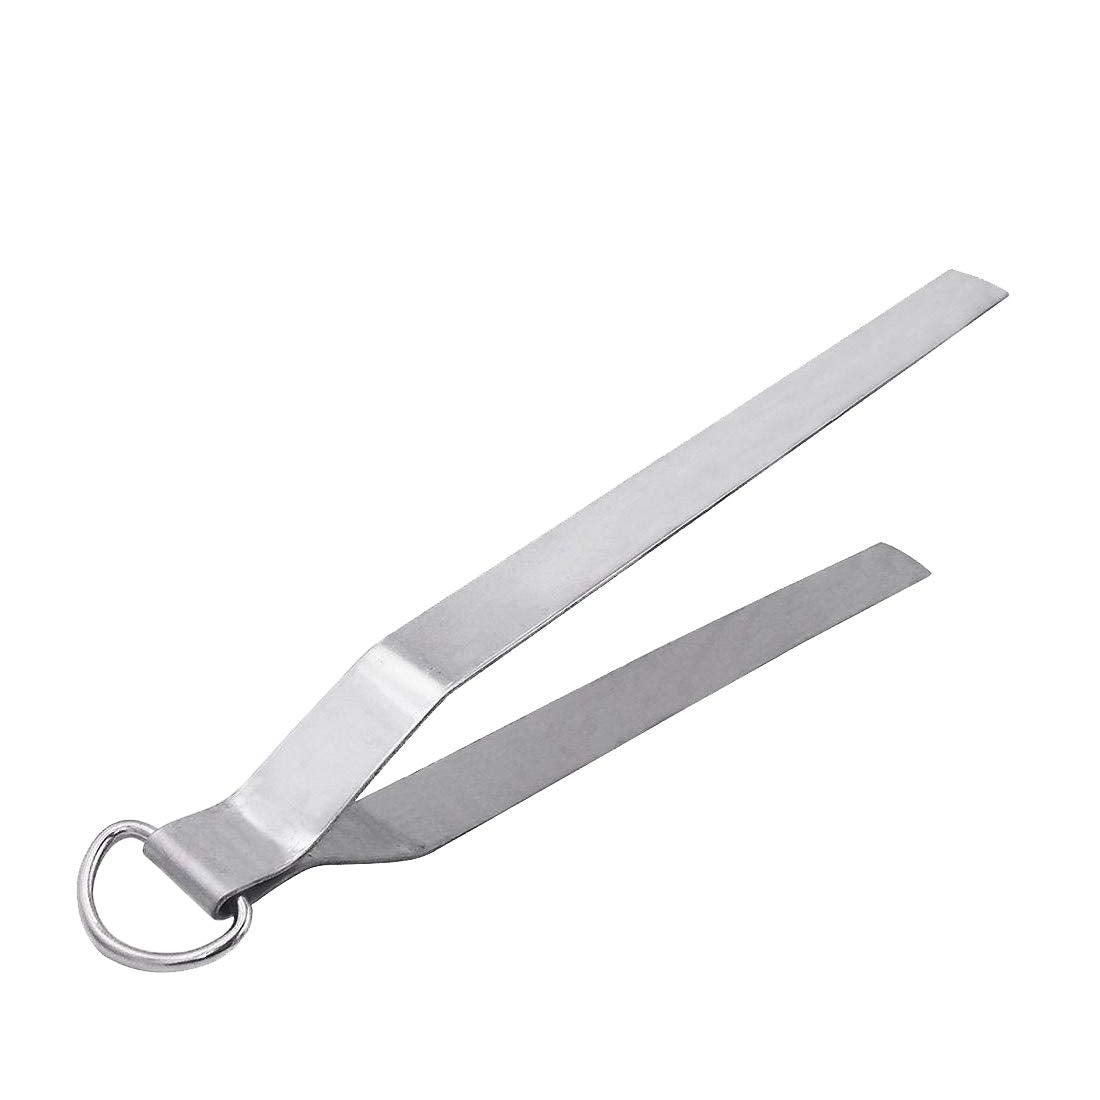 Stainless Steel Cooking Tong/Chimta Gadgets For Kitchen Cooking Utensils - Walgrow.com